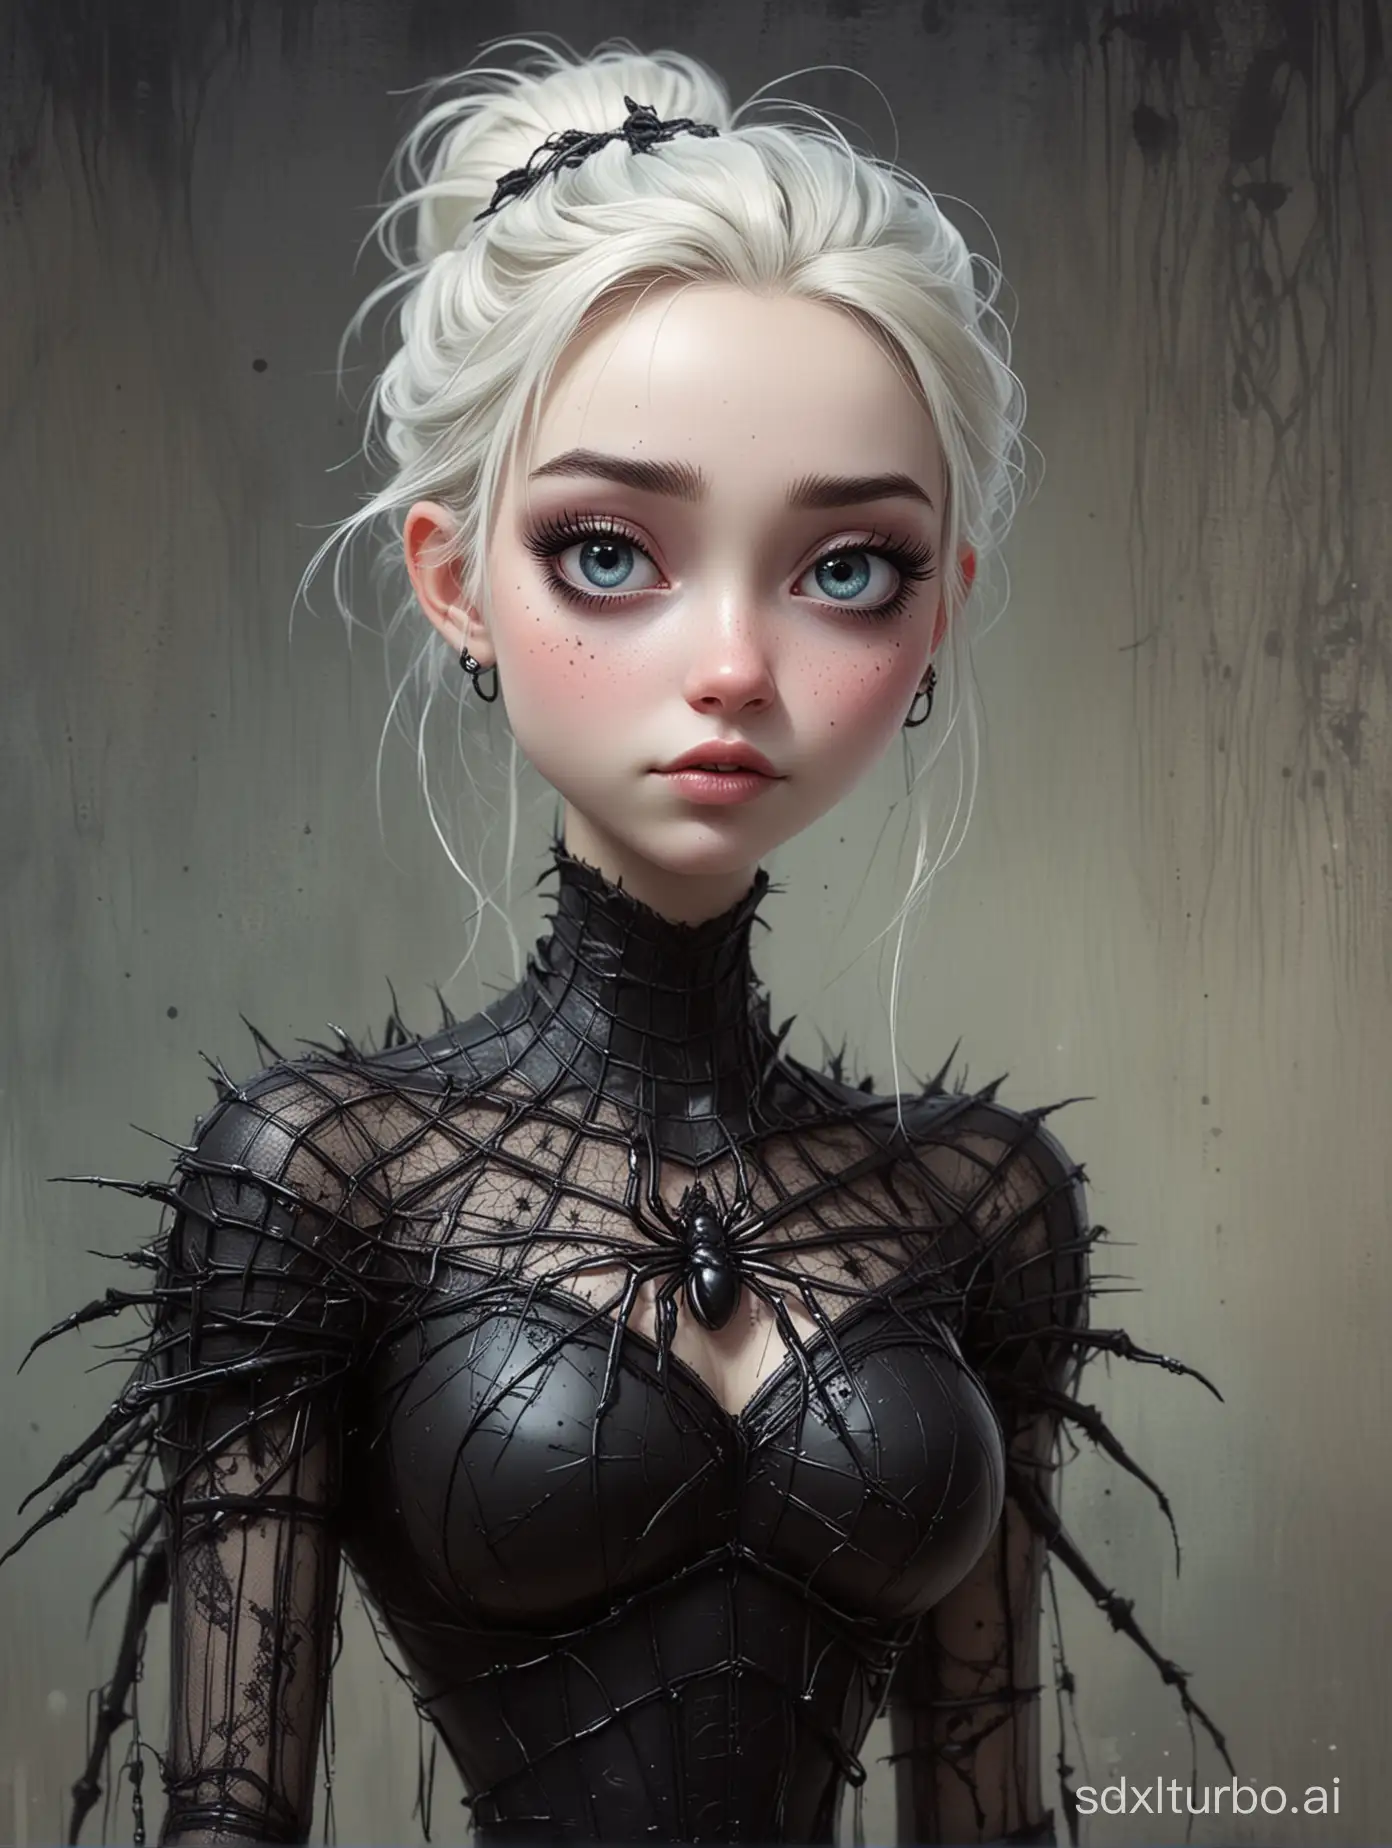 Elsa-Embraces-Gothic-Black-Spider-Style-in-Enigmatic-Art